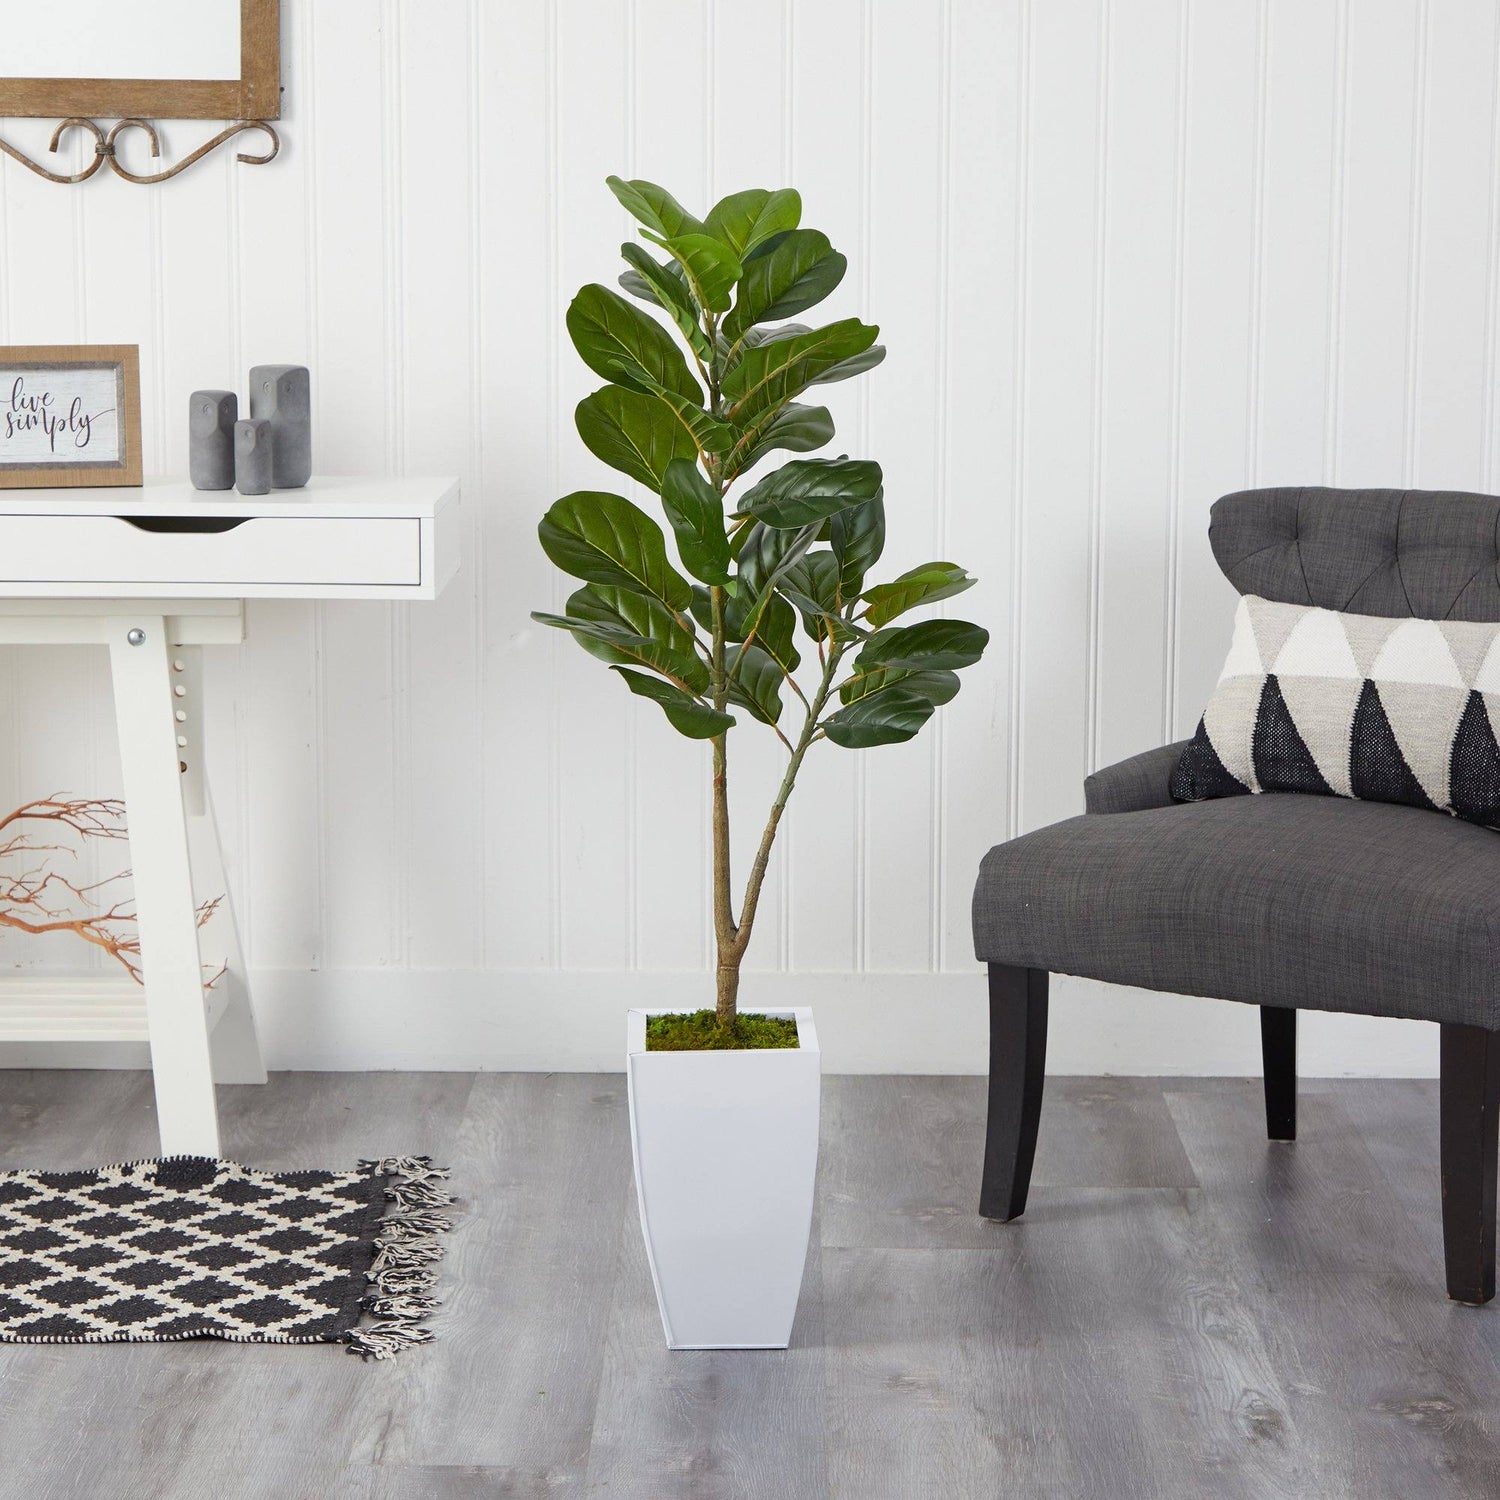 4’ Fiddle Leaf Fig Artificial Tree in White Metal Planter